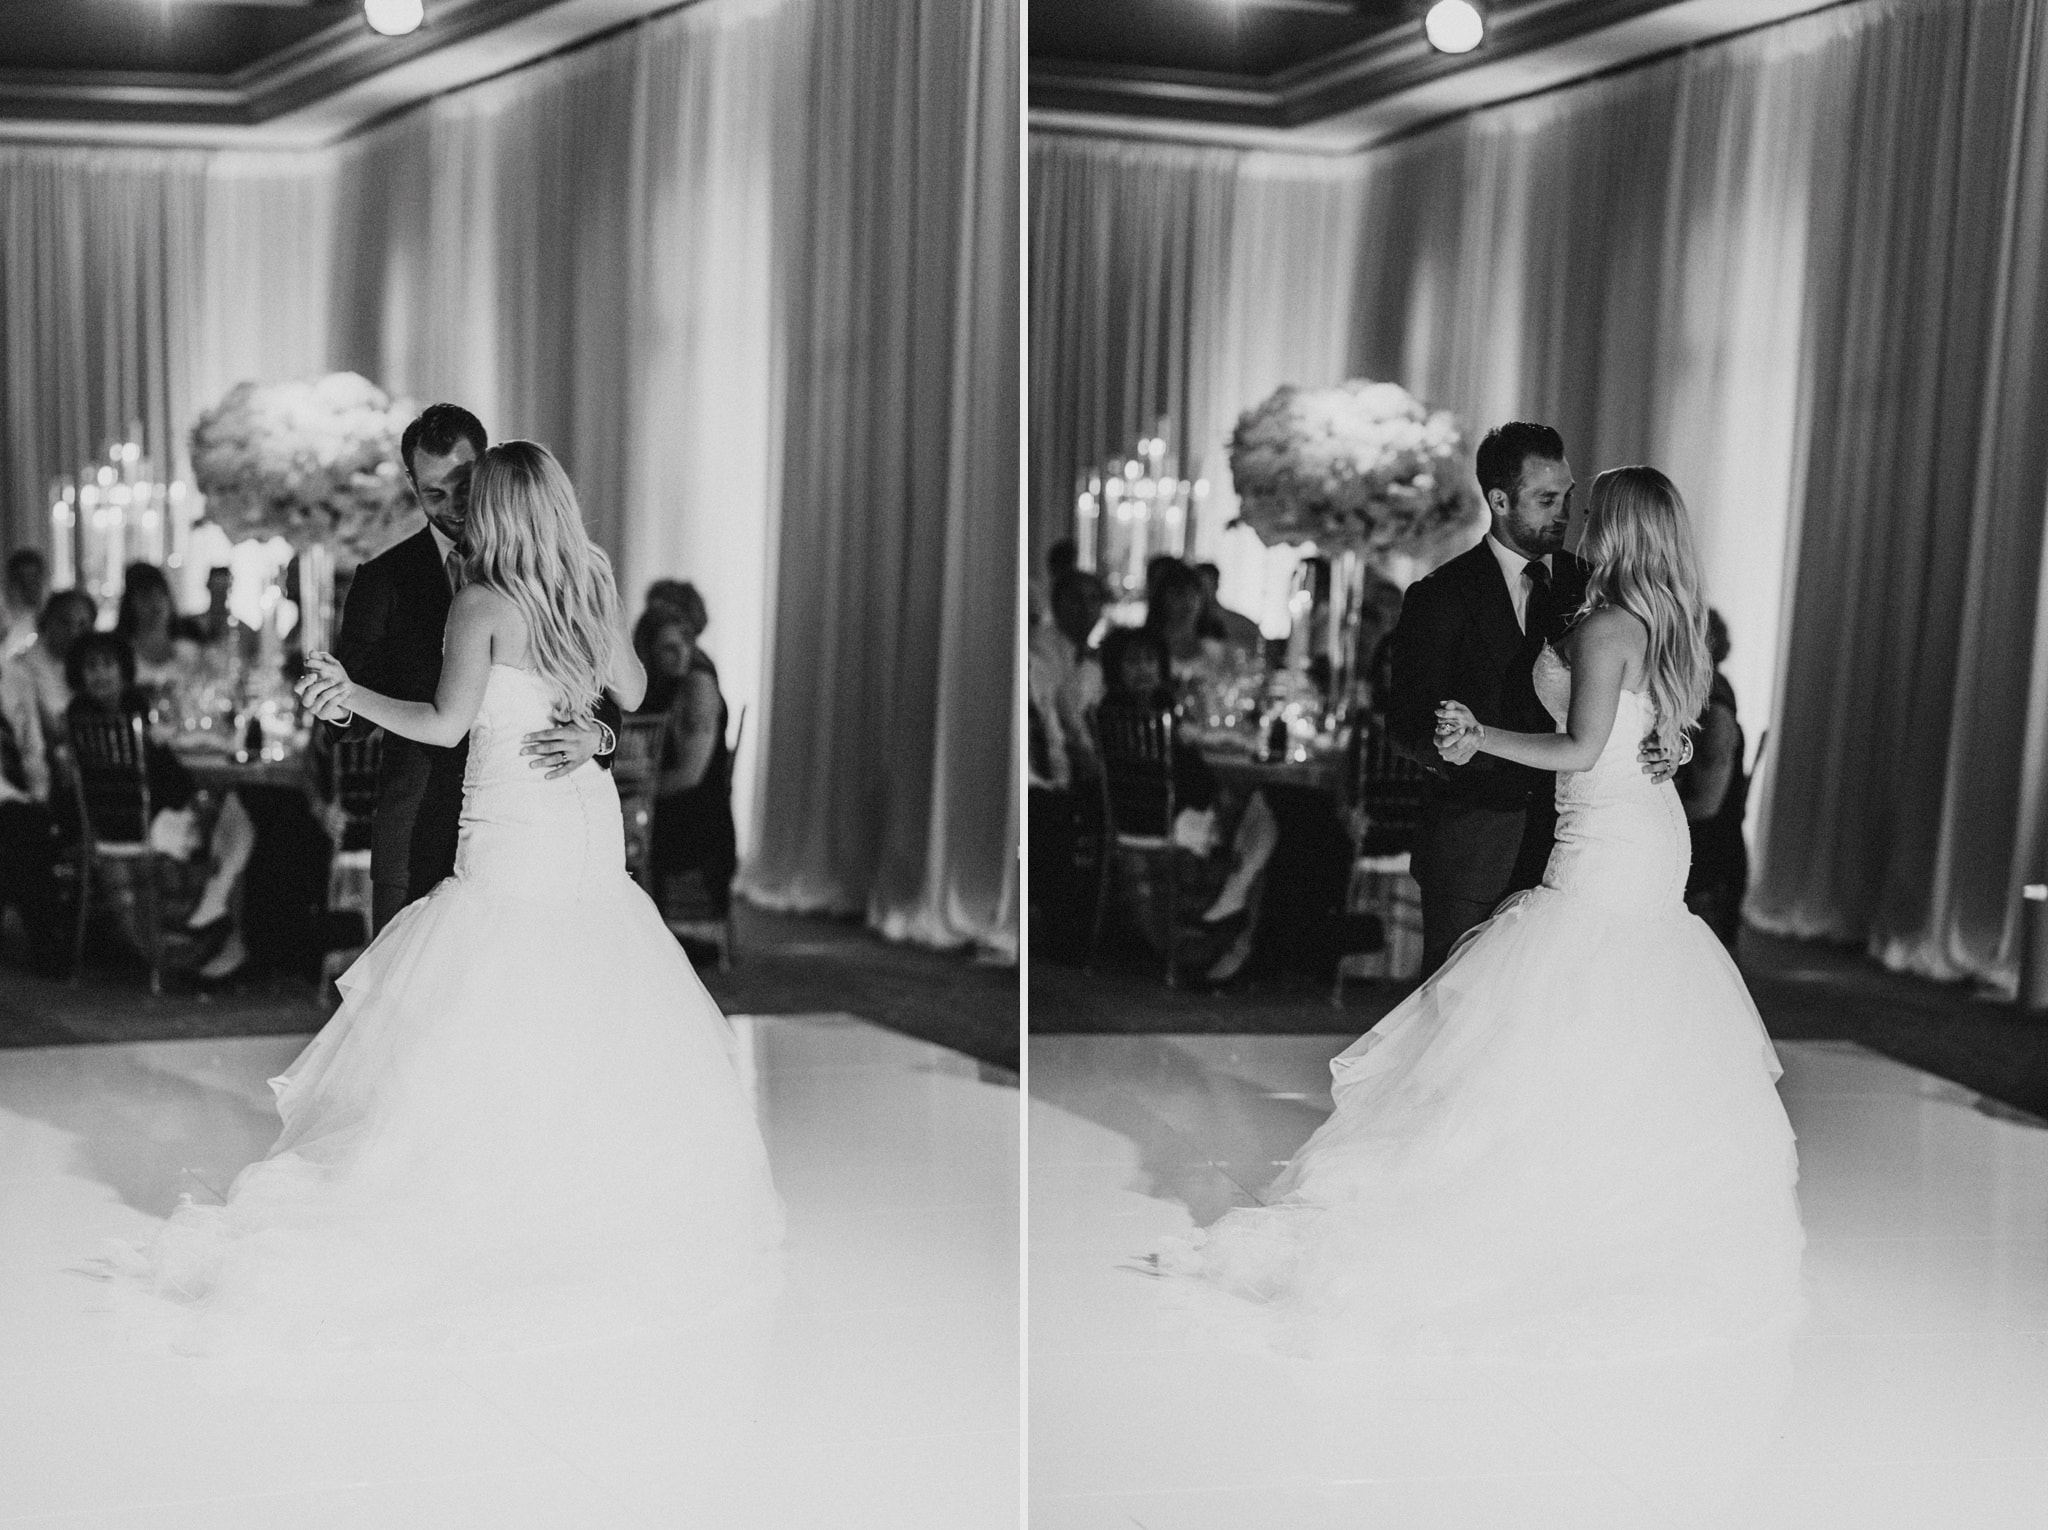 A bride and groom enjoy their first dance together at a beautiful Orange County wedding venue, Pelican Hill Resort.